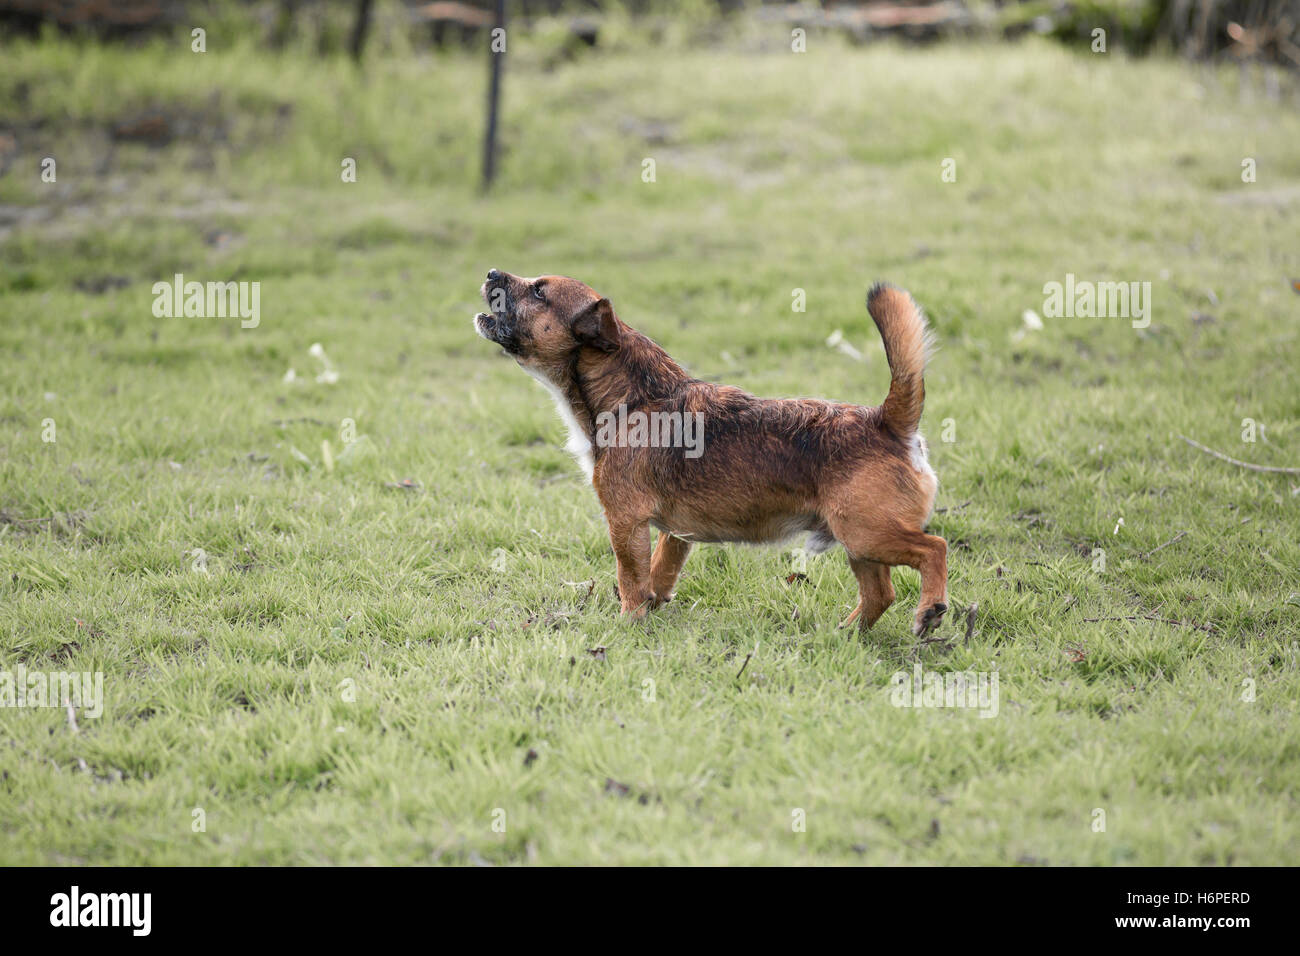 Border terrier cross dog barking and howling Stock Photo - Alamy